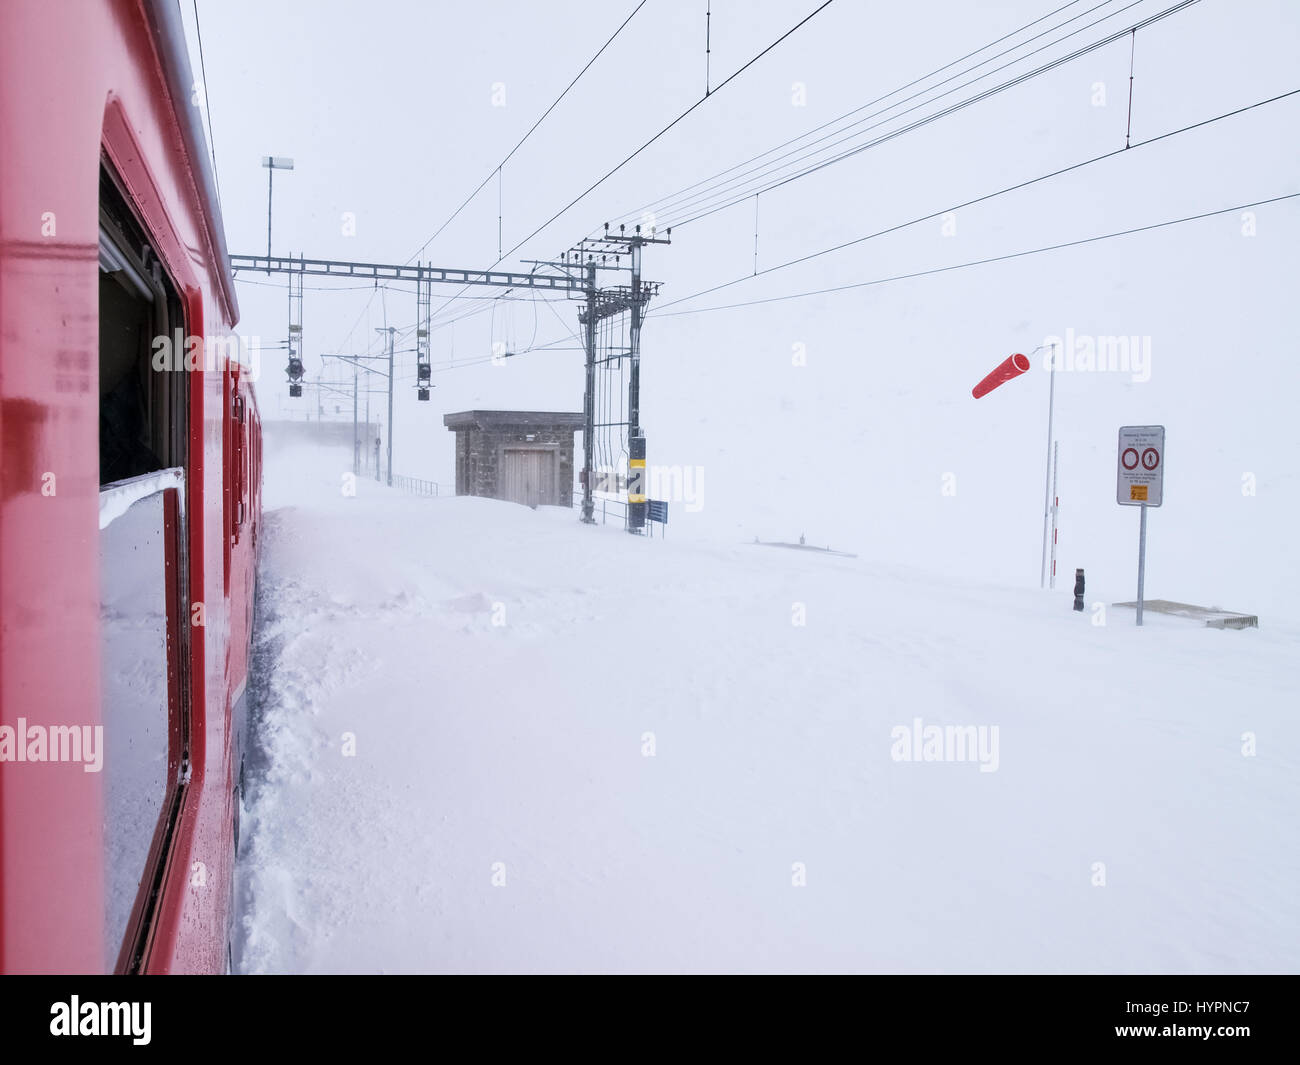 Bernina, Switzerland - April 27, 2016: trains of the Rhaetian Railway in transit along the line Tirano - St.Moritz during a snowy day. Stock Photo